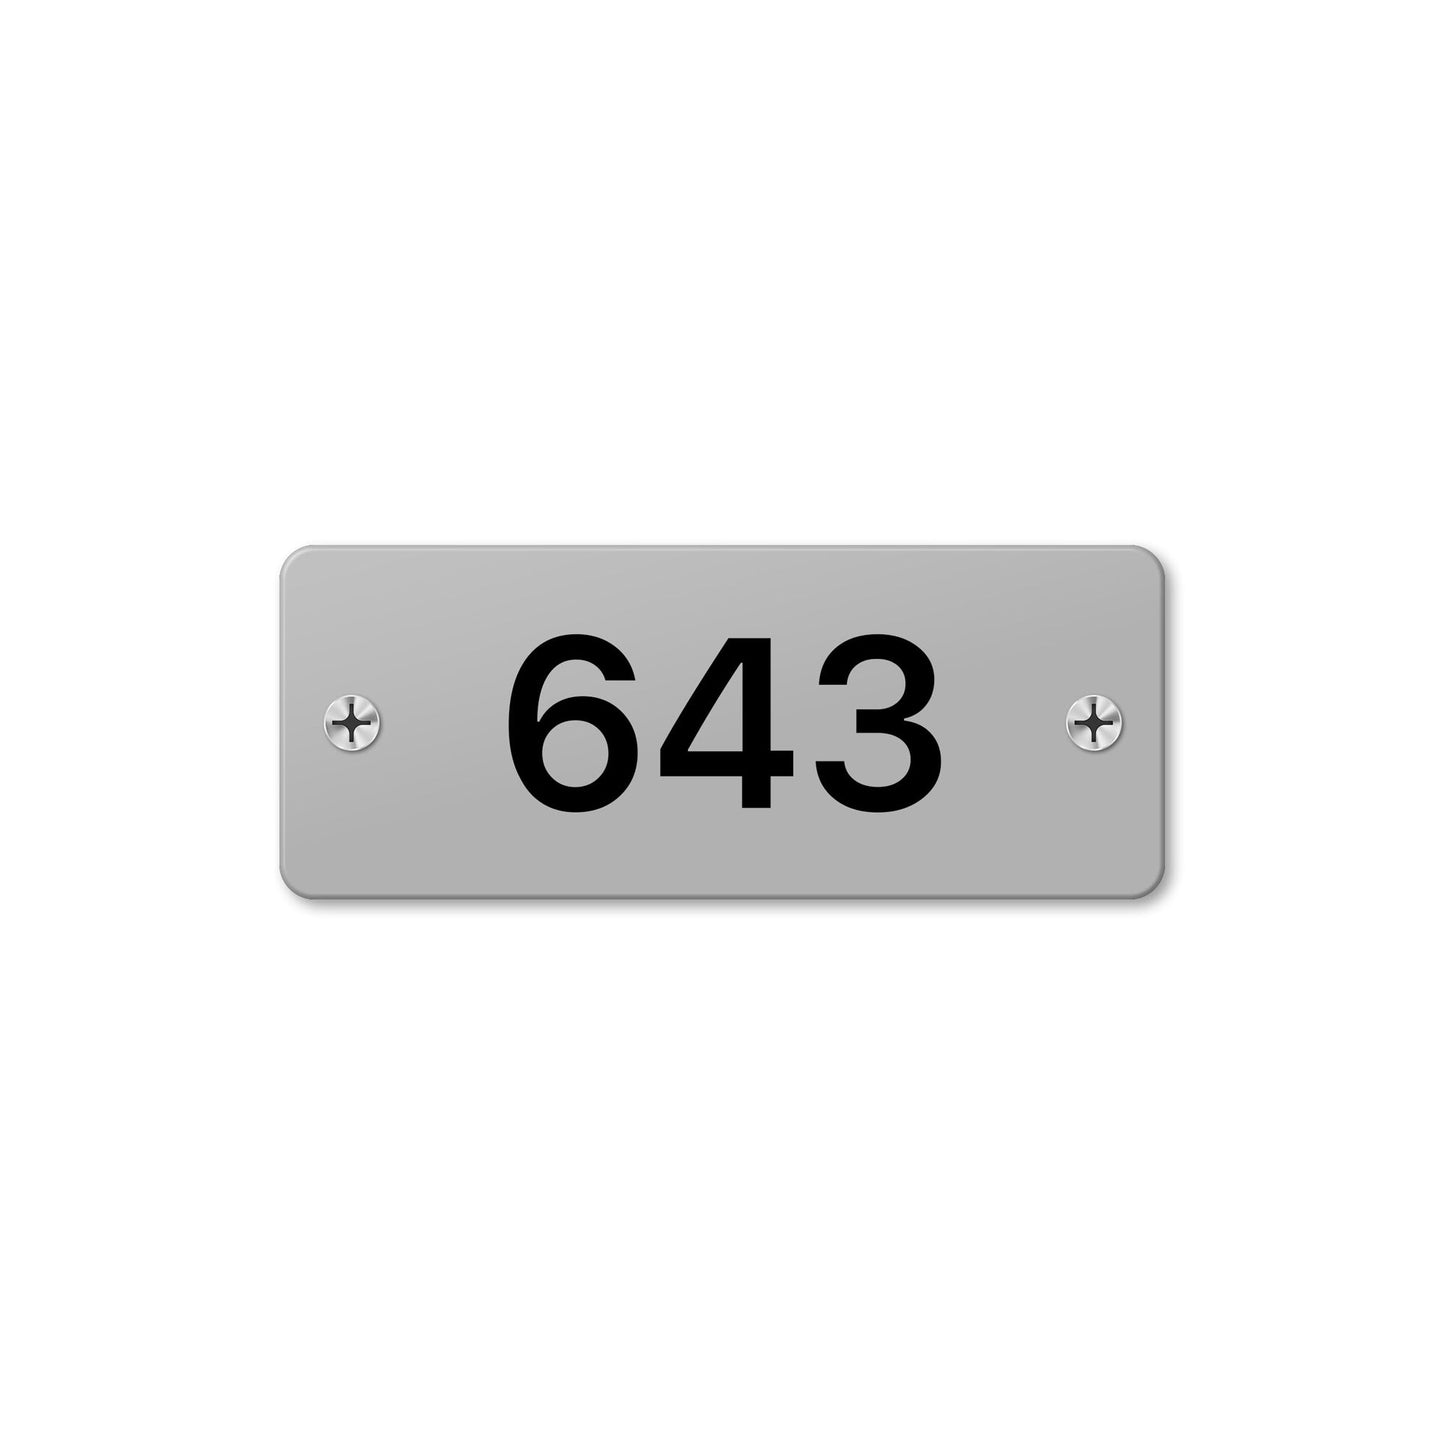 Numeral 643